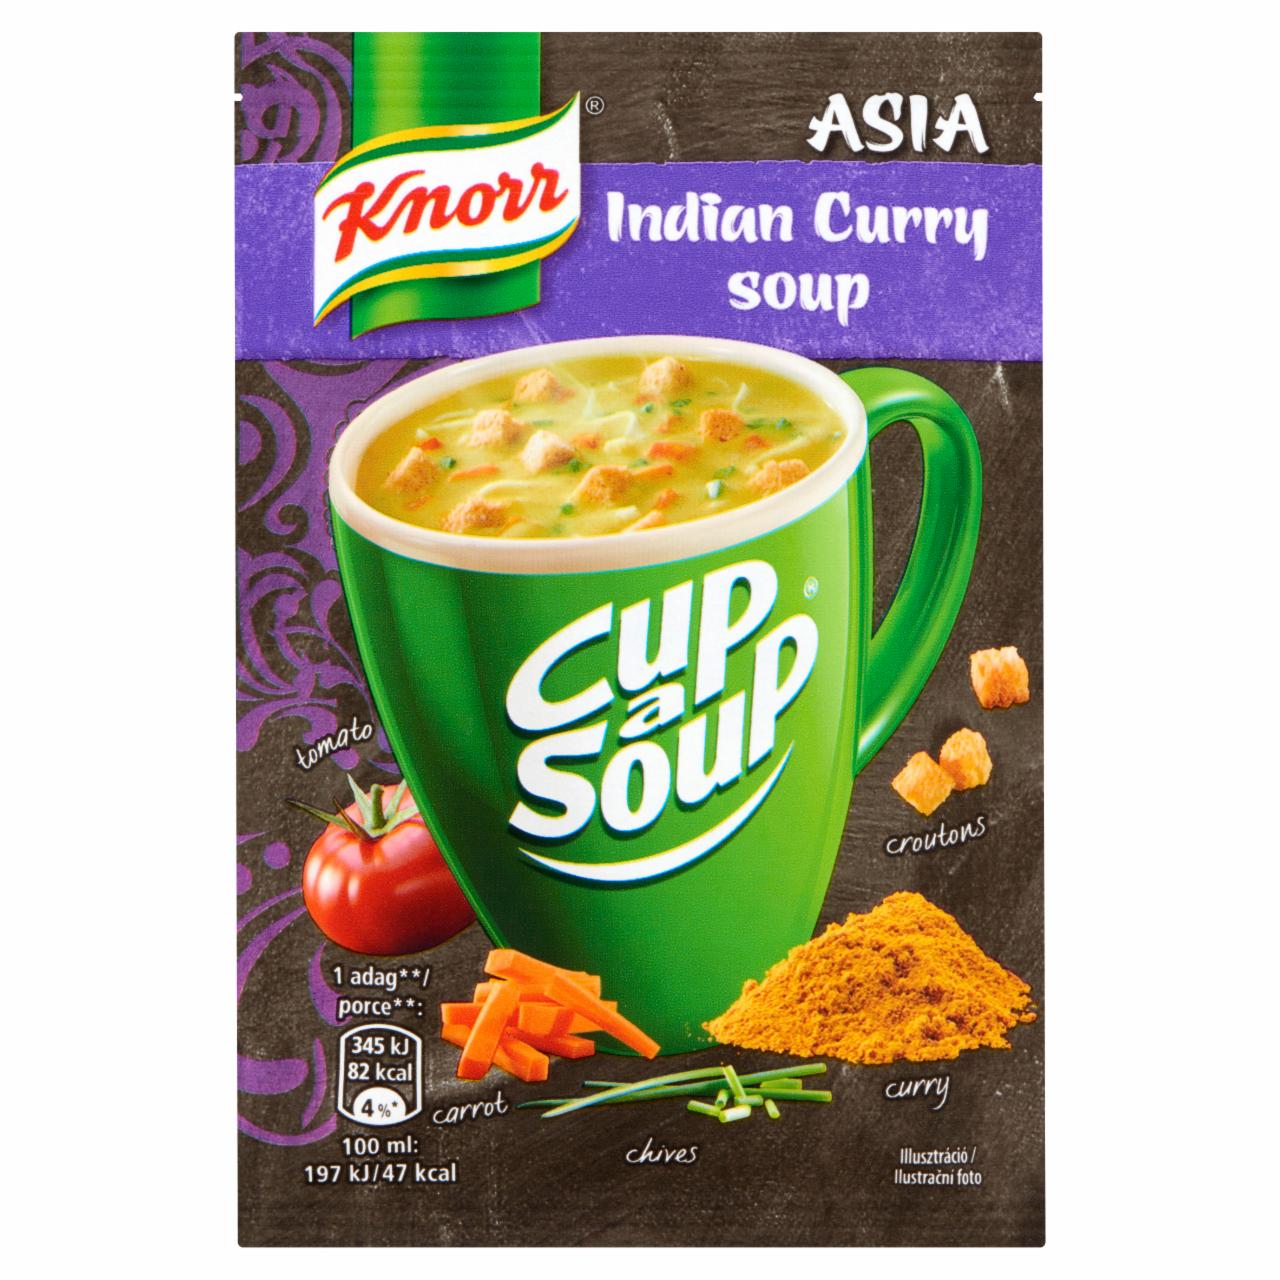 Képek - Knorr Cup a Soup Asia indiai curry leves 17 g